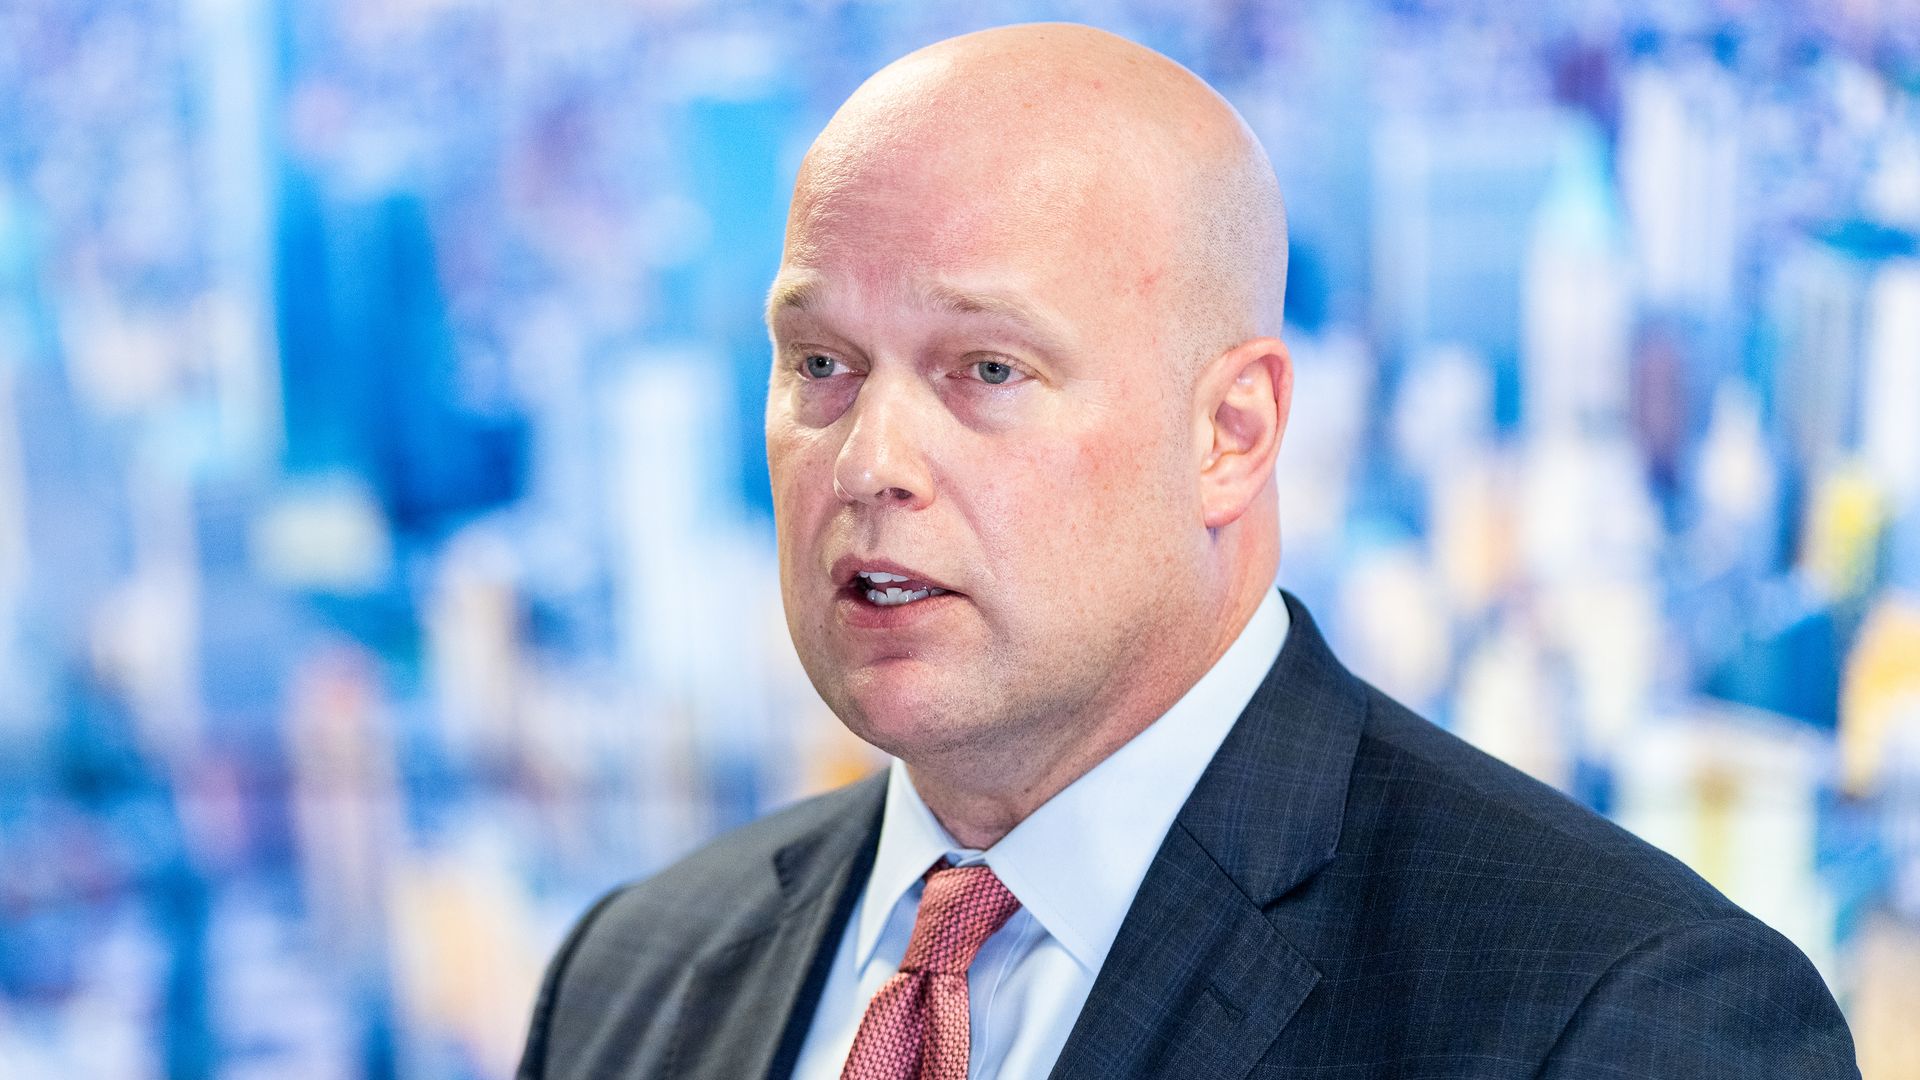 Matt whitaker in a suit and tie